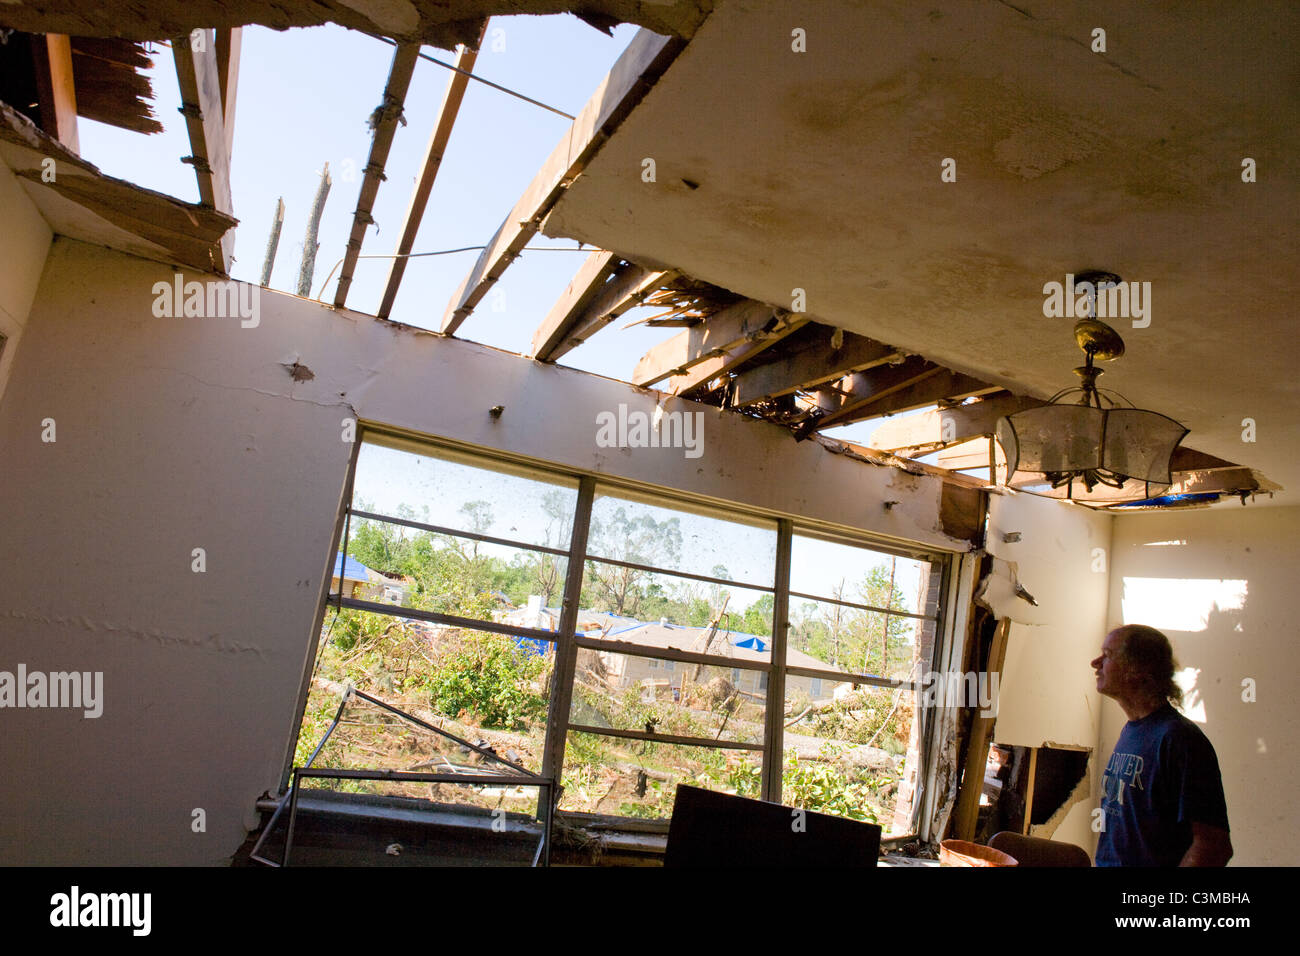 A man looks at damage to his home after tornado hits his town in Tuscaloosa Alabama, USA Stock Photo